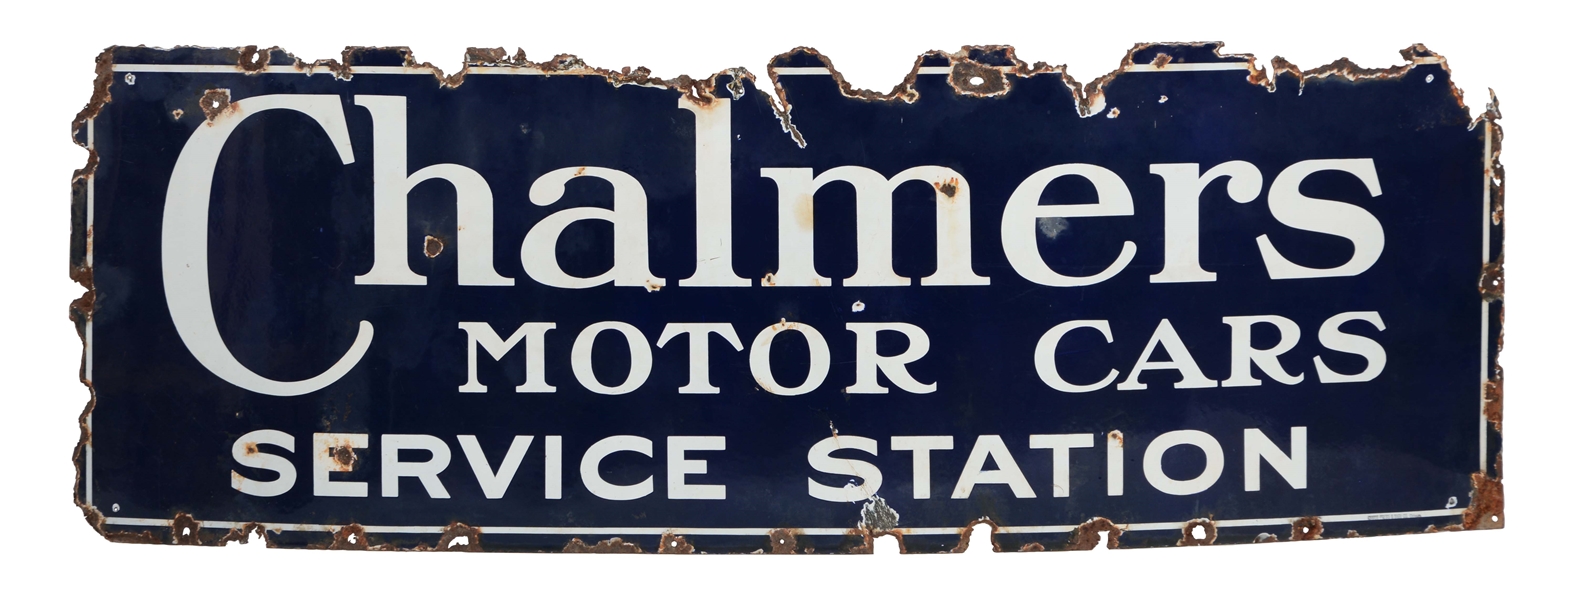 CHALMERS MOTOR CARS AUTHORIZED SERVICE STATION PORCELAIN SIGN. 